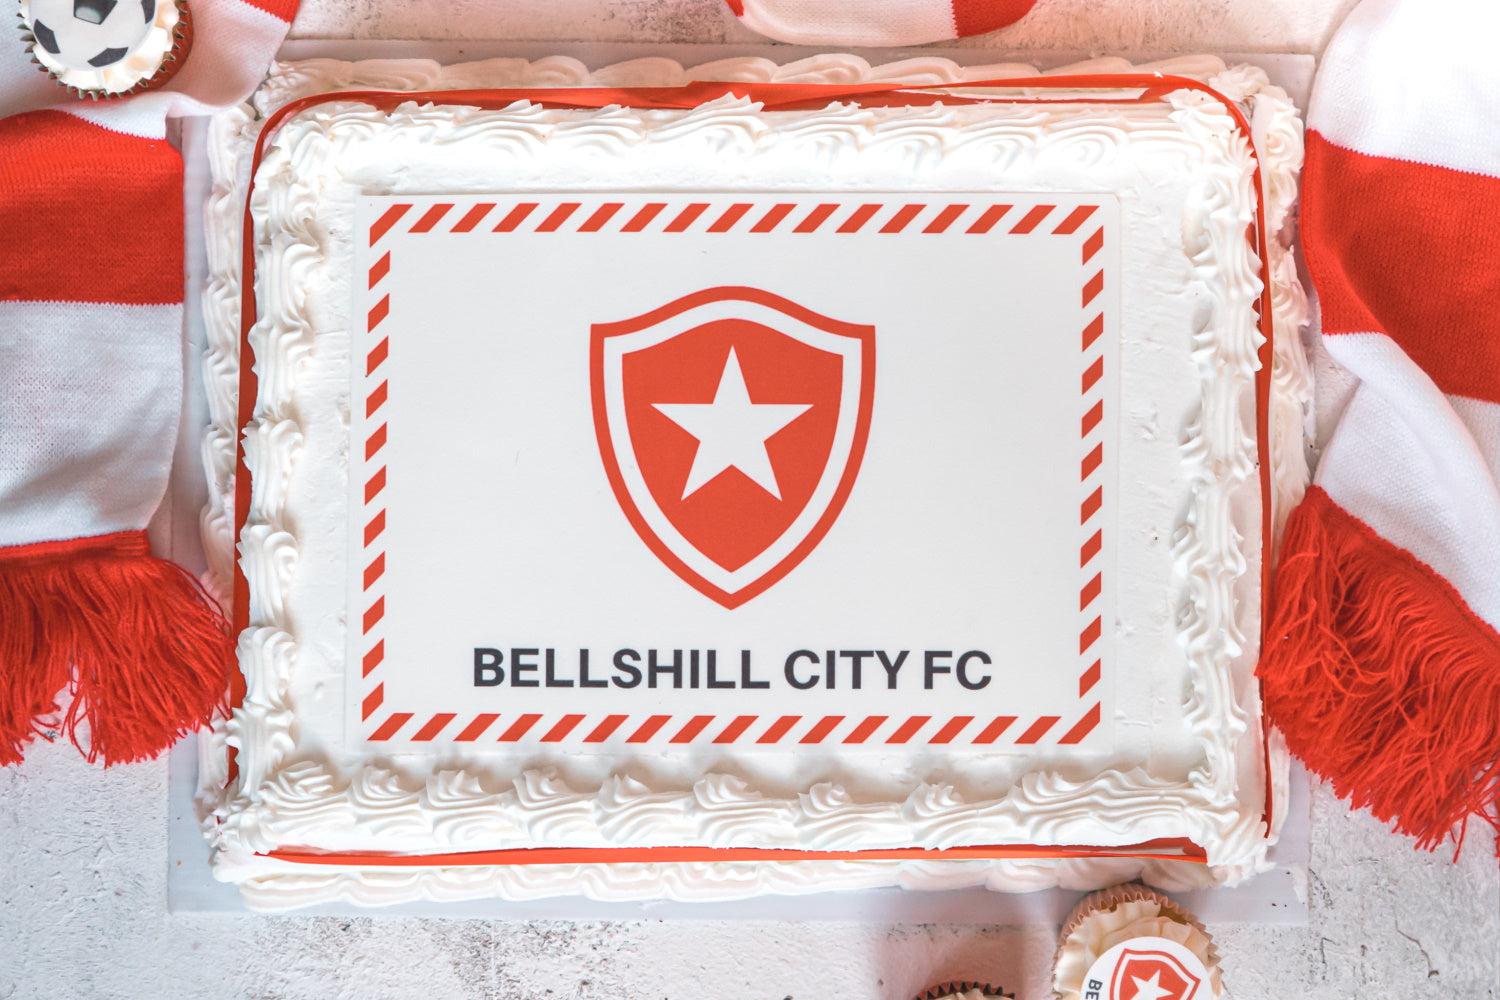 A4 edible cake topper personalised with a football badge